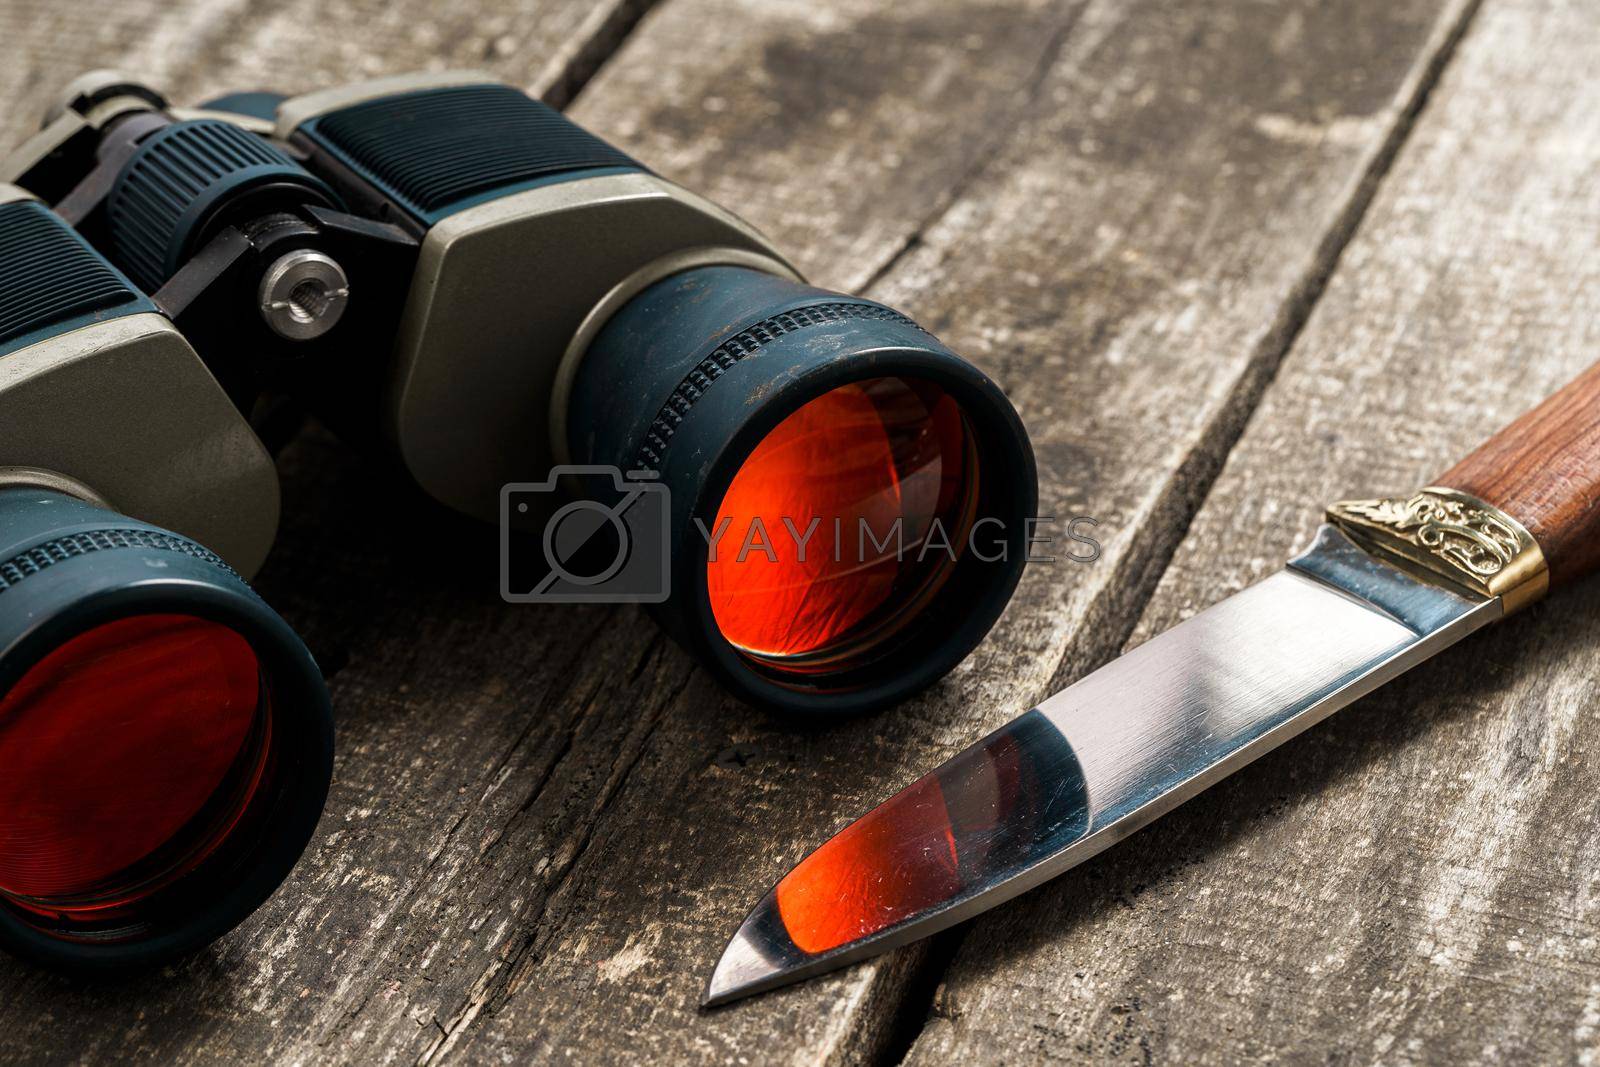 Royalty free image of Hunting equipment binoculars on wooden background close up by Fabrikasimf